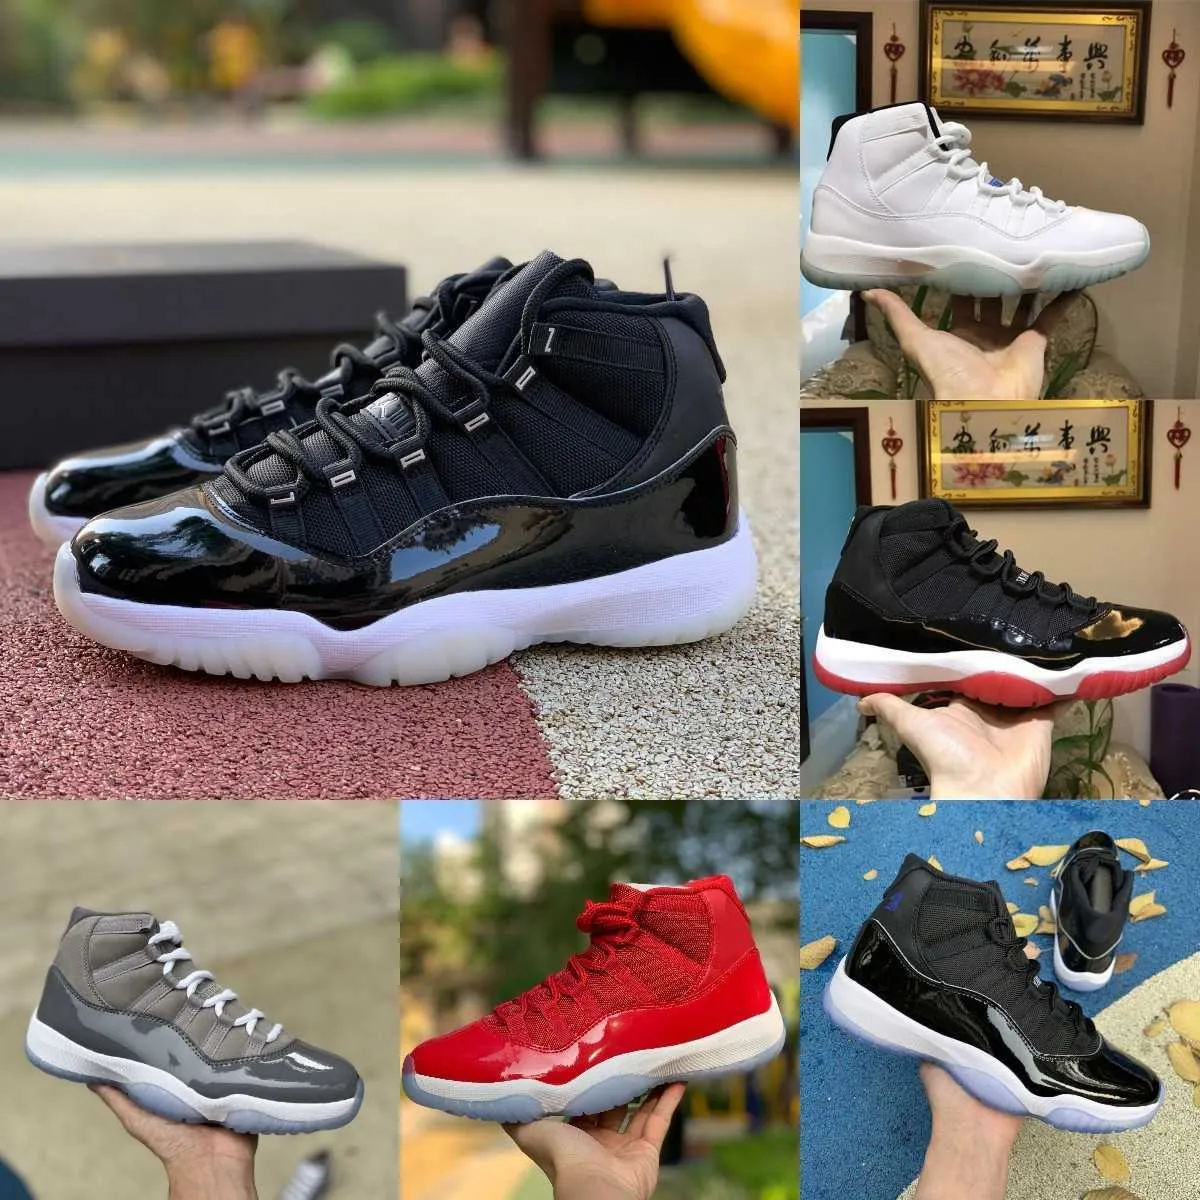 2023 Jumpman Jubilee Bred 11 11s High Basketball Chaussures Cool Grey Legend Blue 25th Anniversary Space Jam Gamma Blue Pâques Concord 45 Low Columbia Triple Sneakers S4